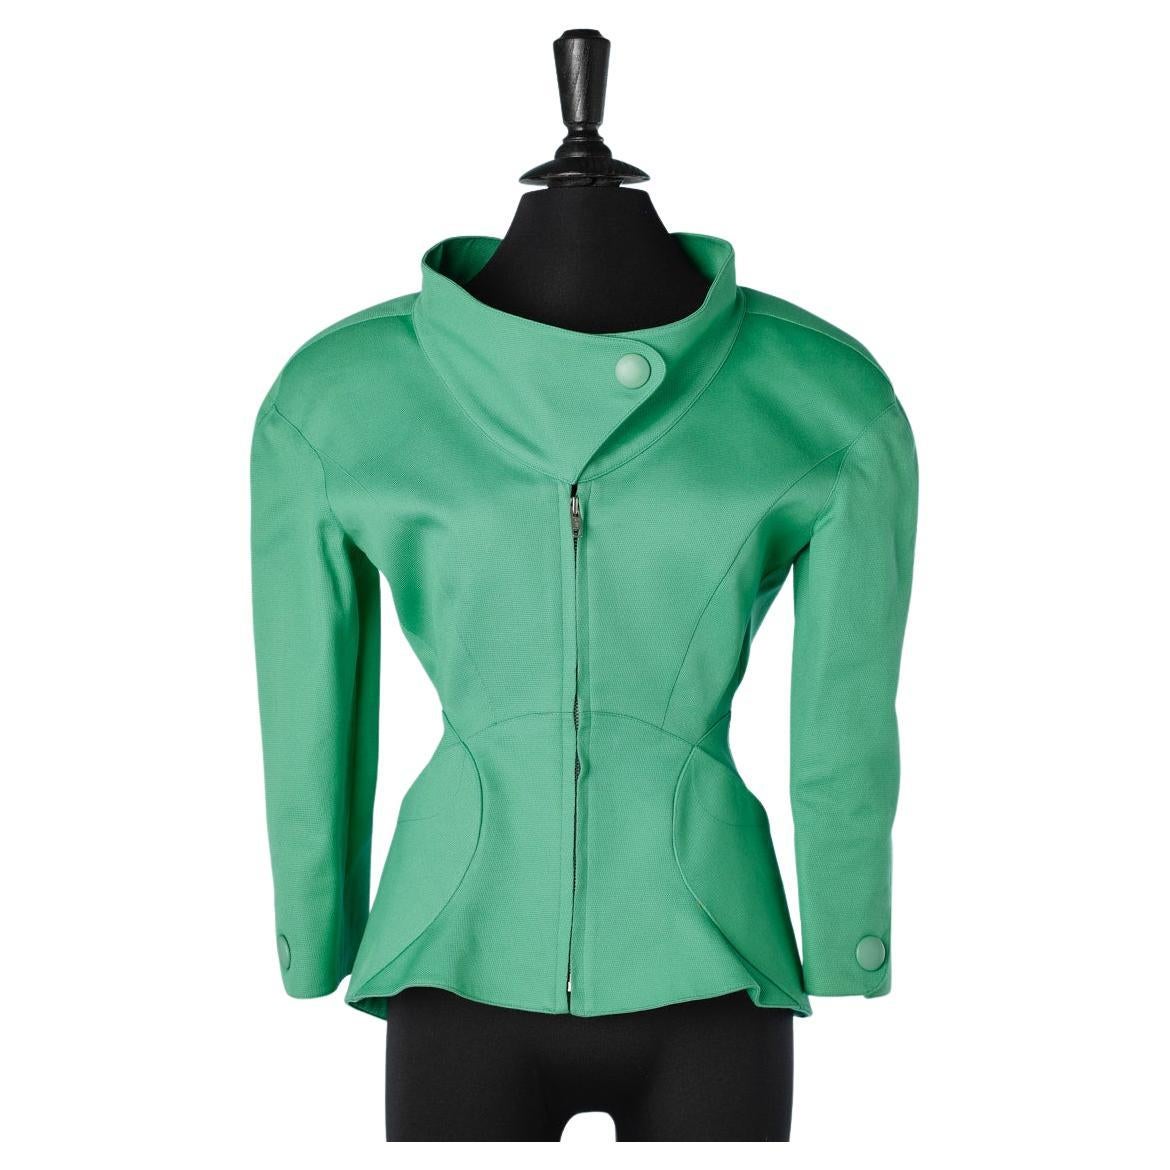 Green cotton jacket wit zip in the middle front and snaps Thierry Mugler 